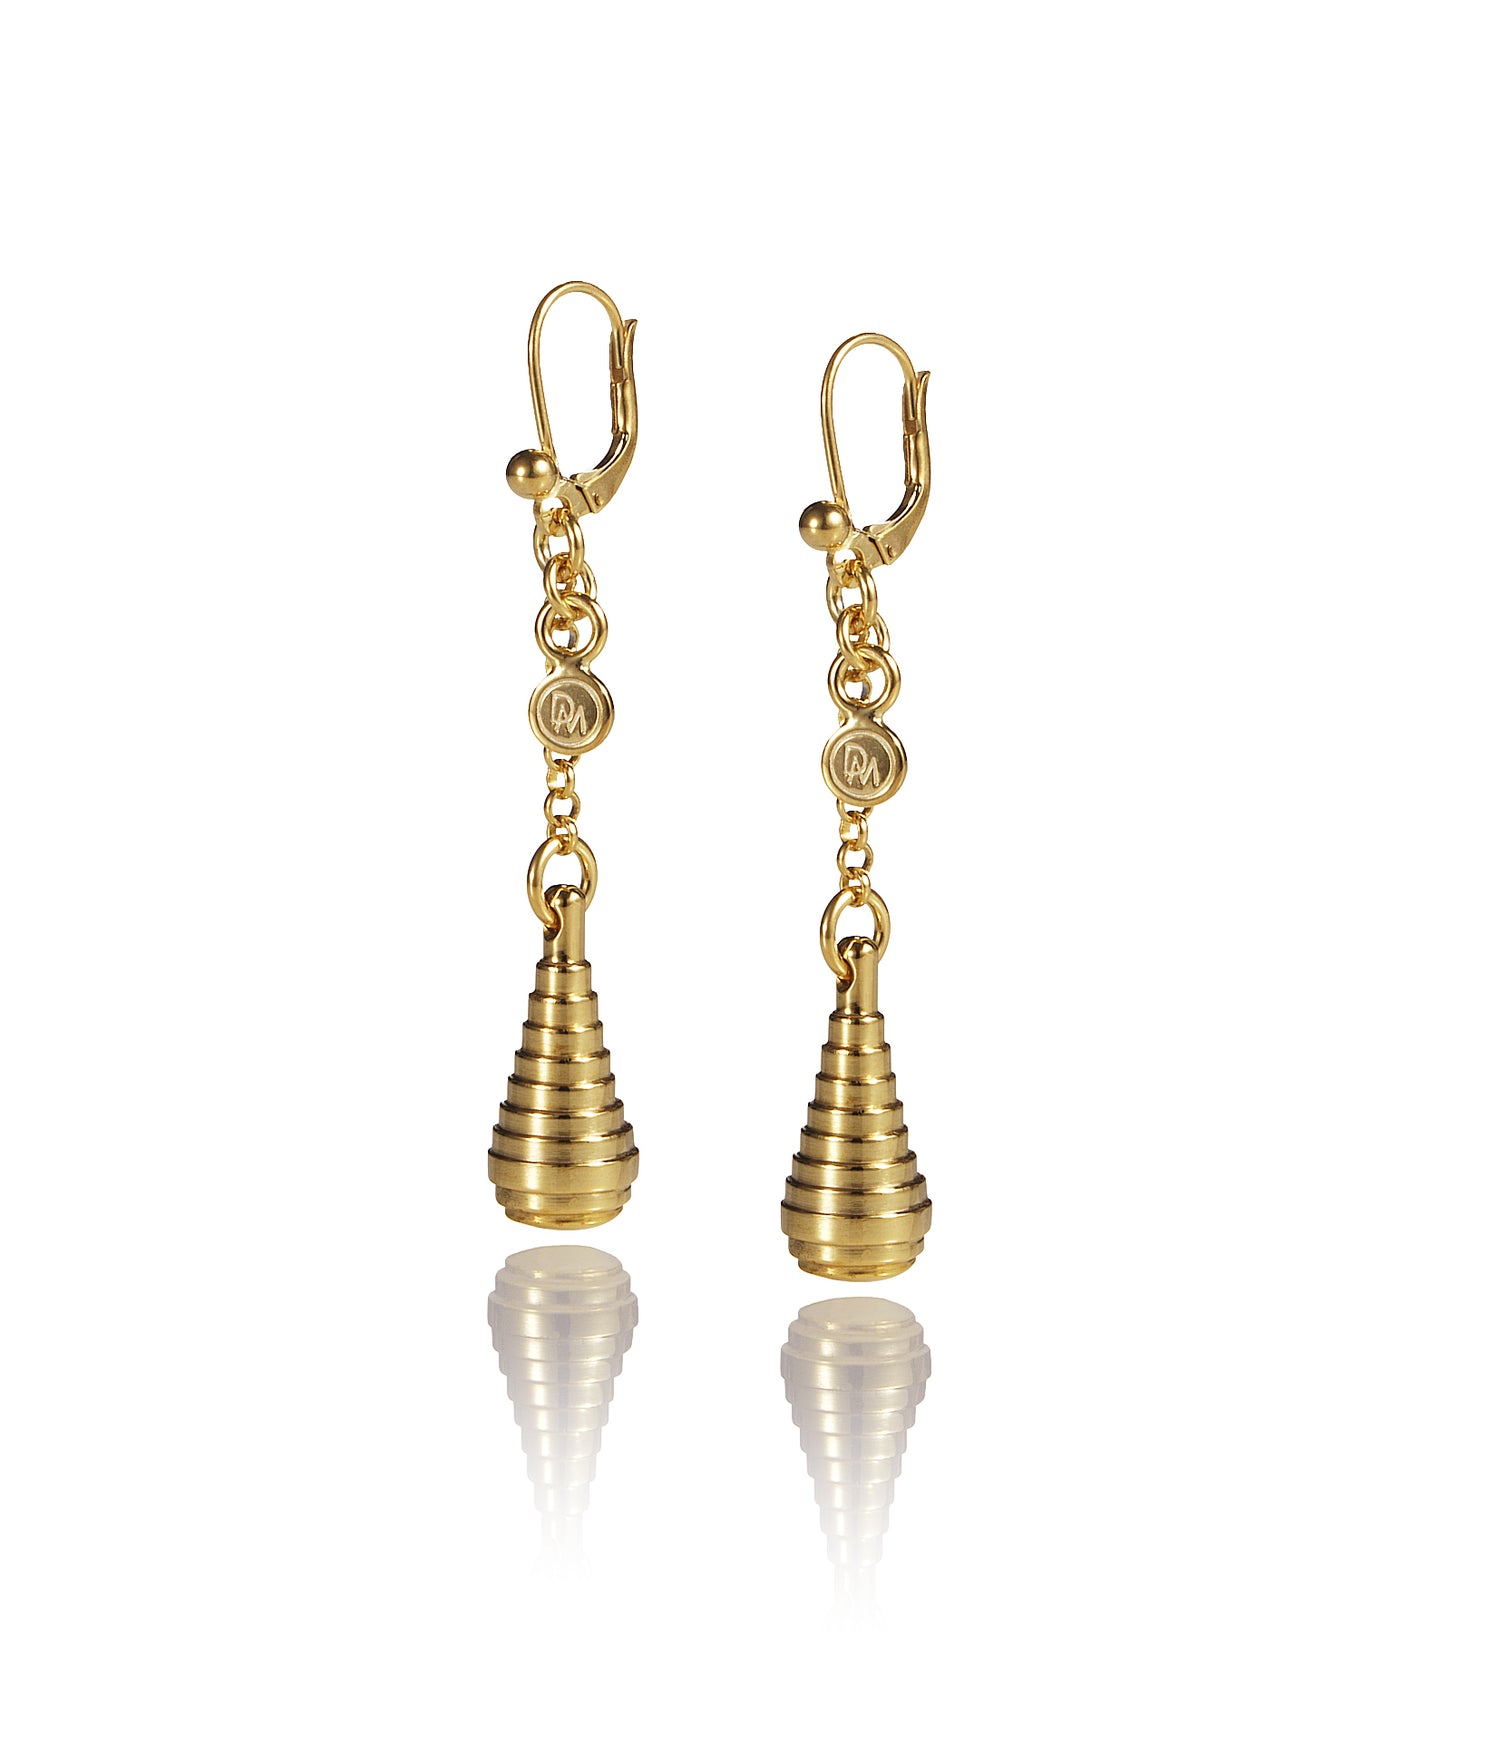 Popular and chic long earrings from Drop collection.  Material: 18 karat gold-plated silver.